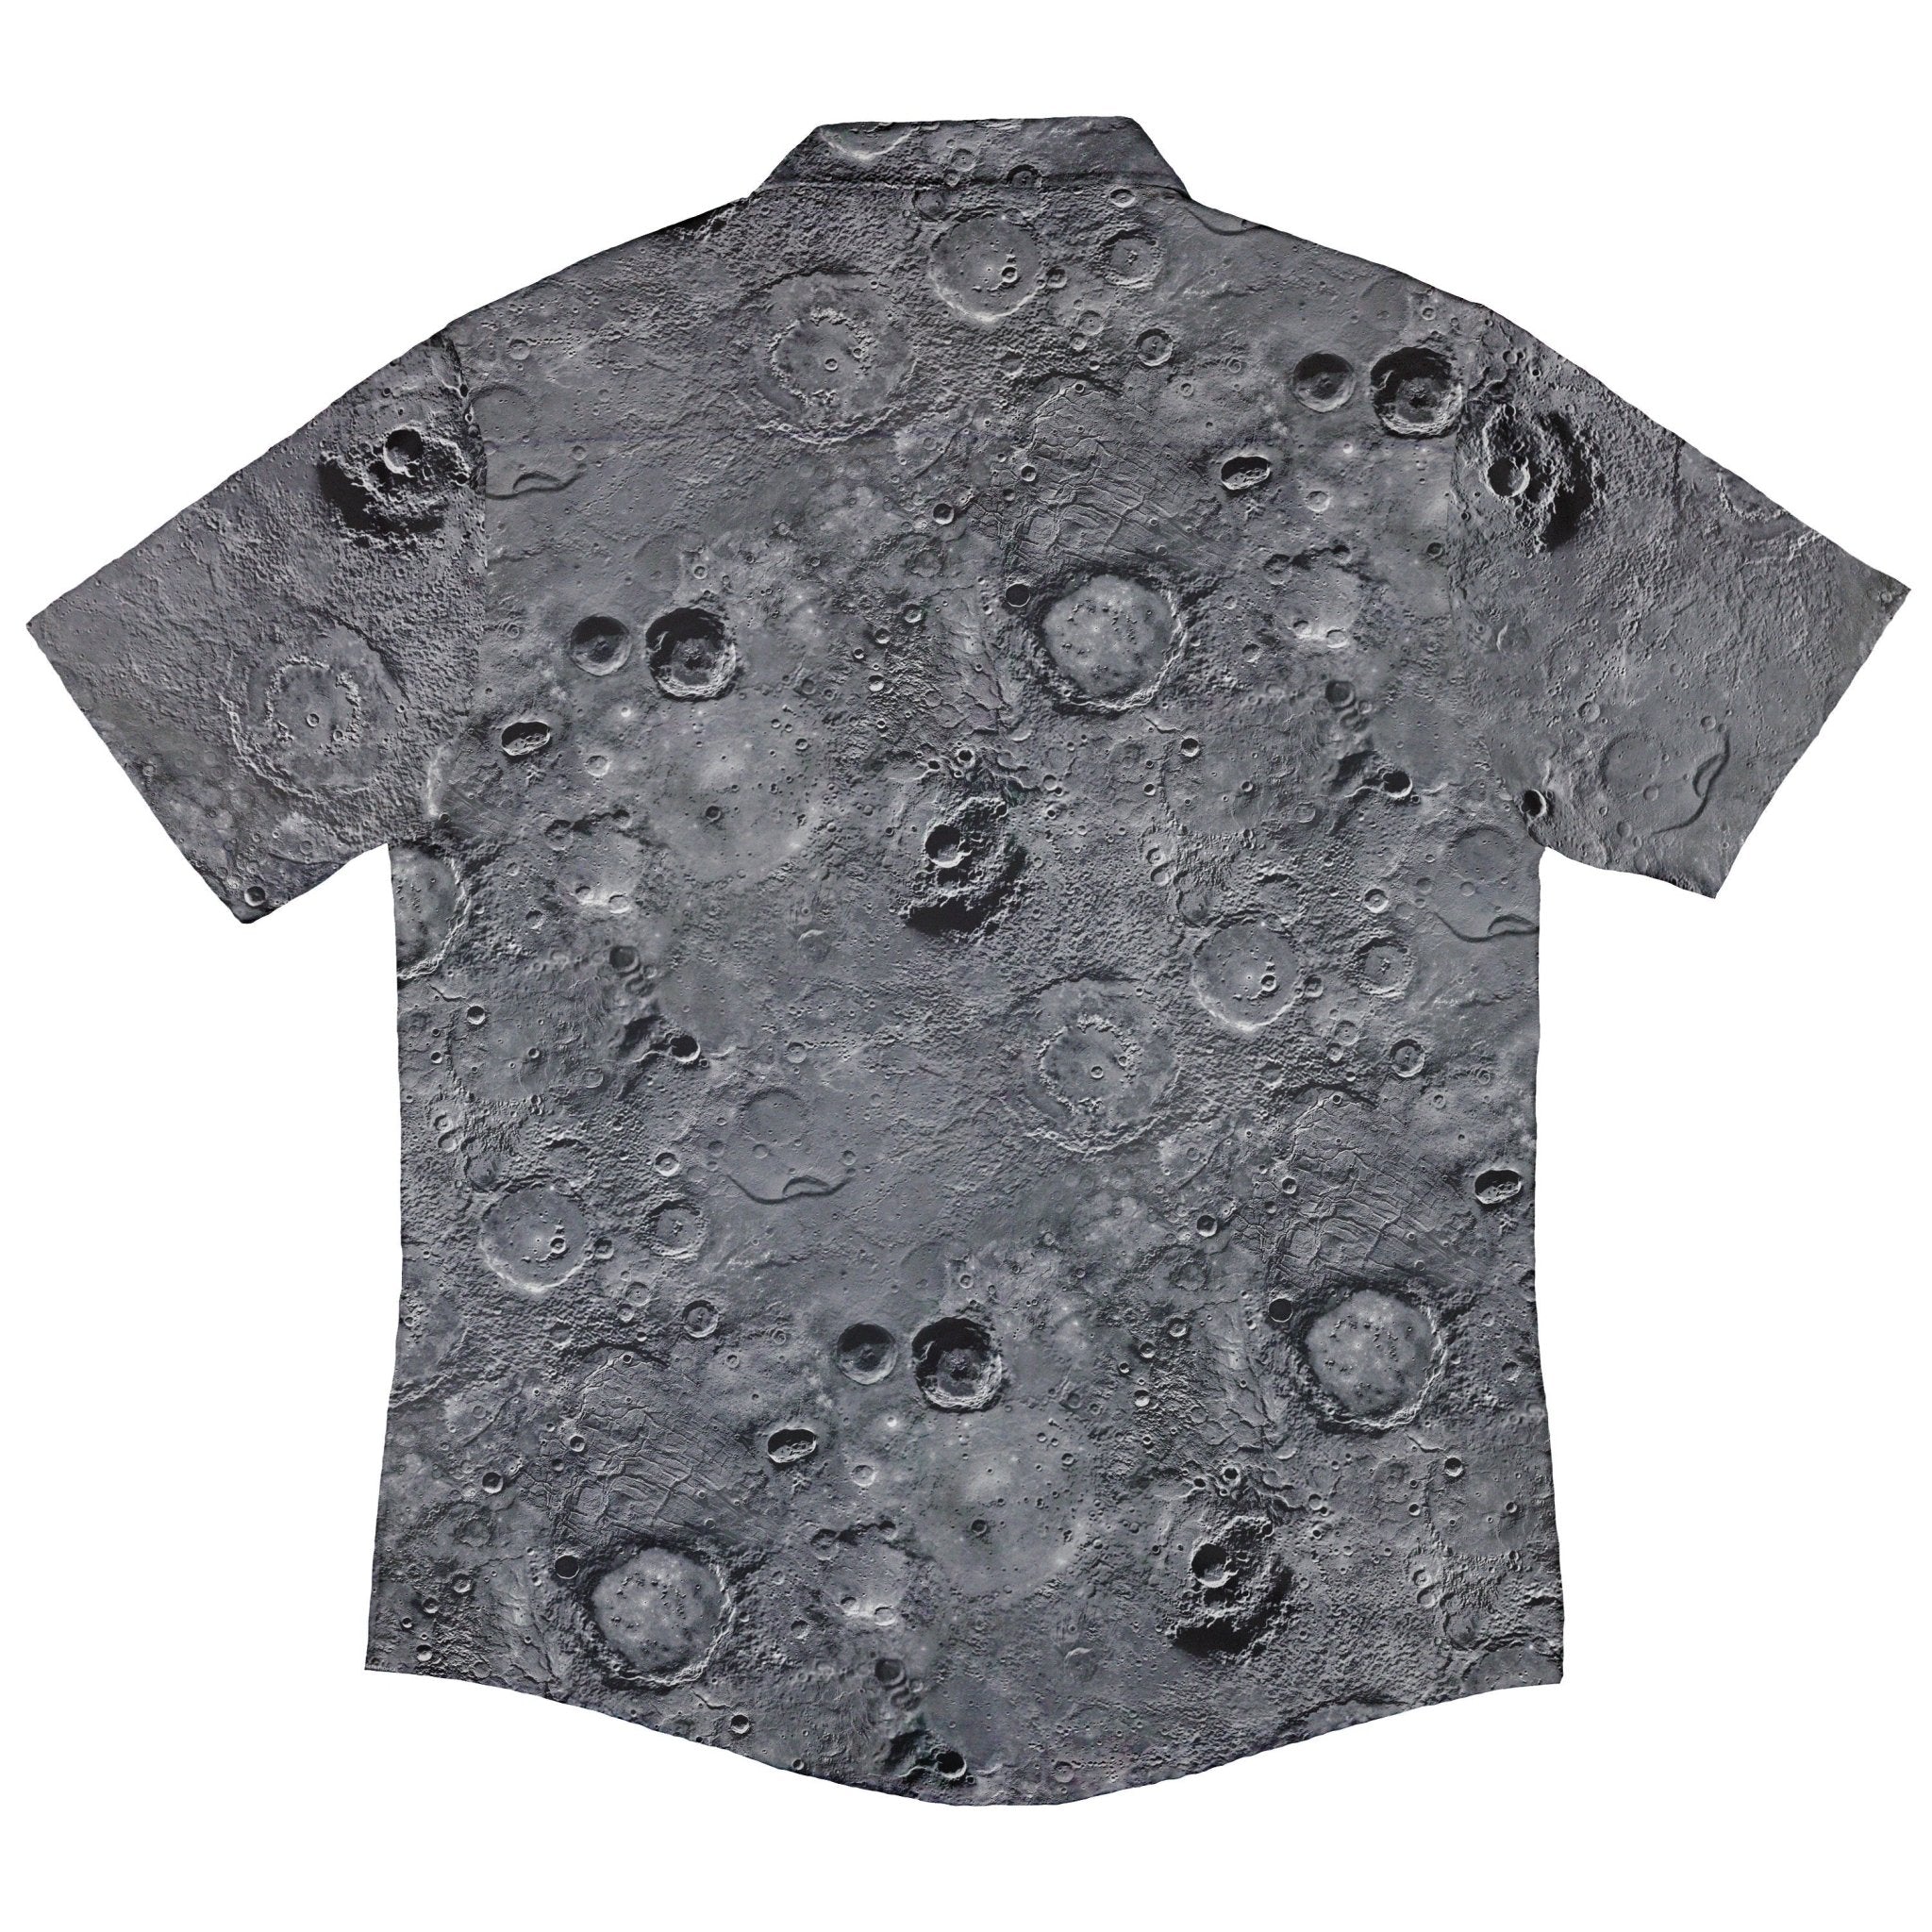 Surface of Mercury Button Up Shirt - adult sizing - Designs by Nathan - science print